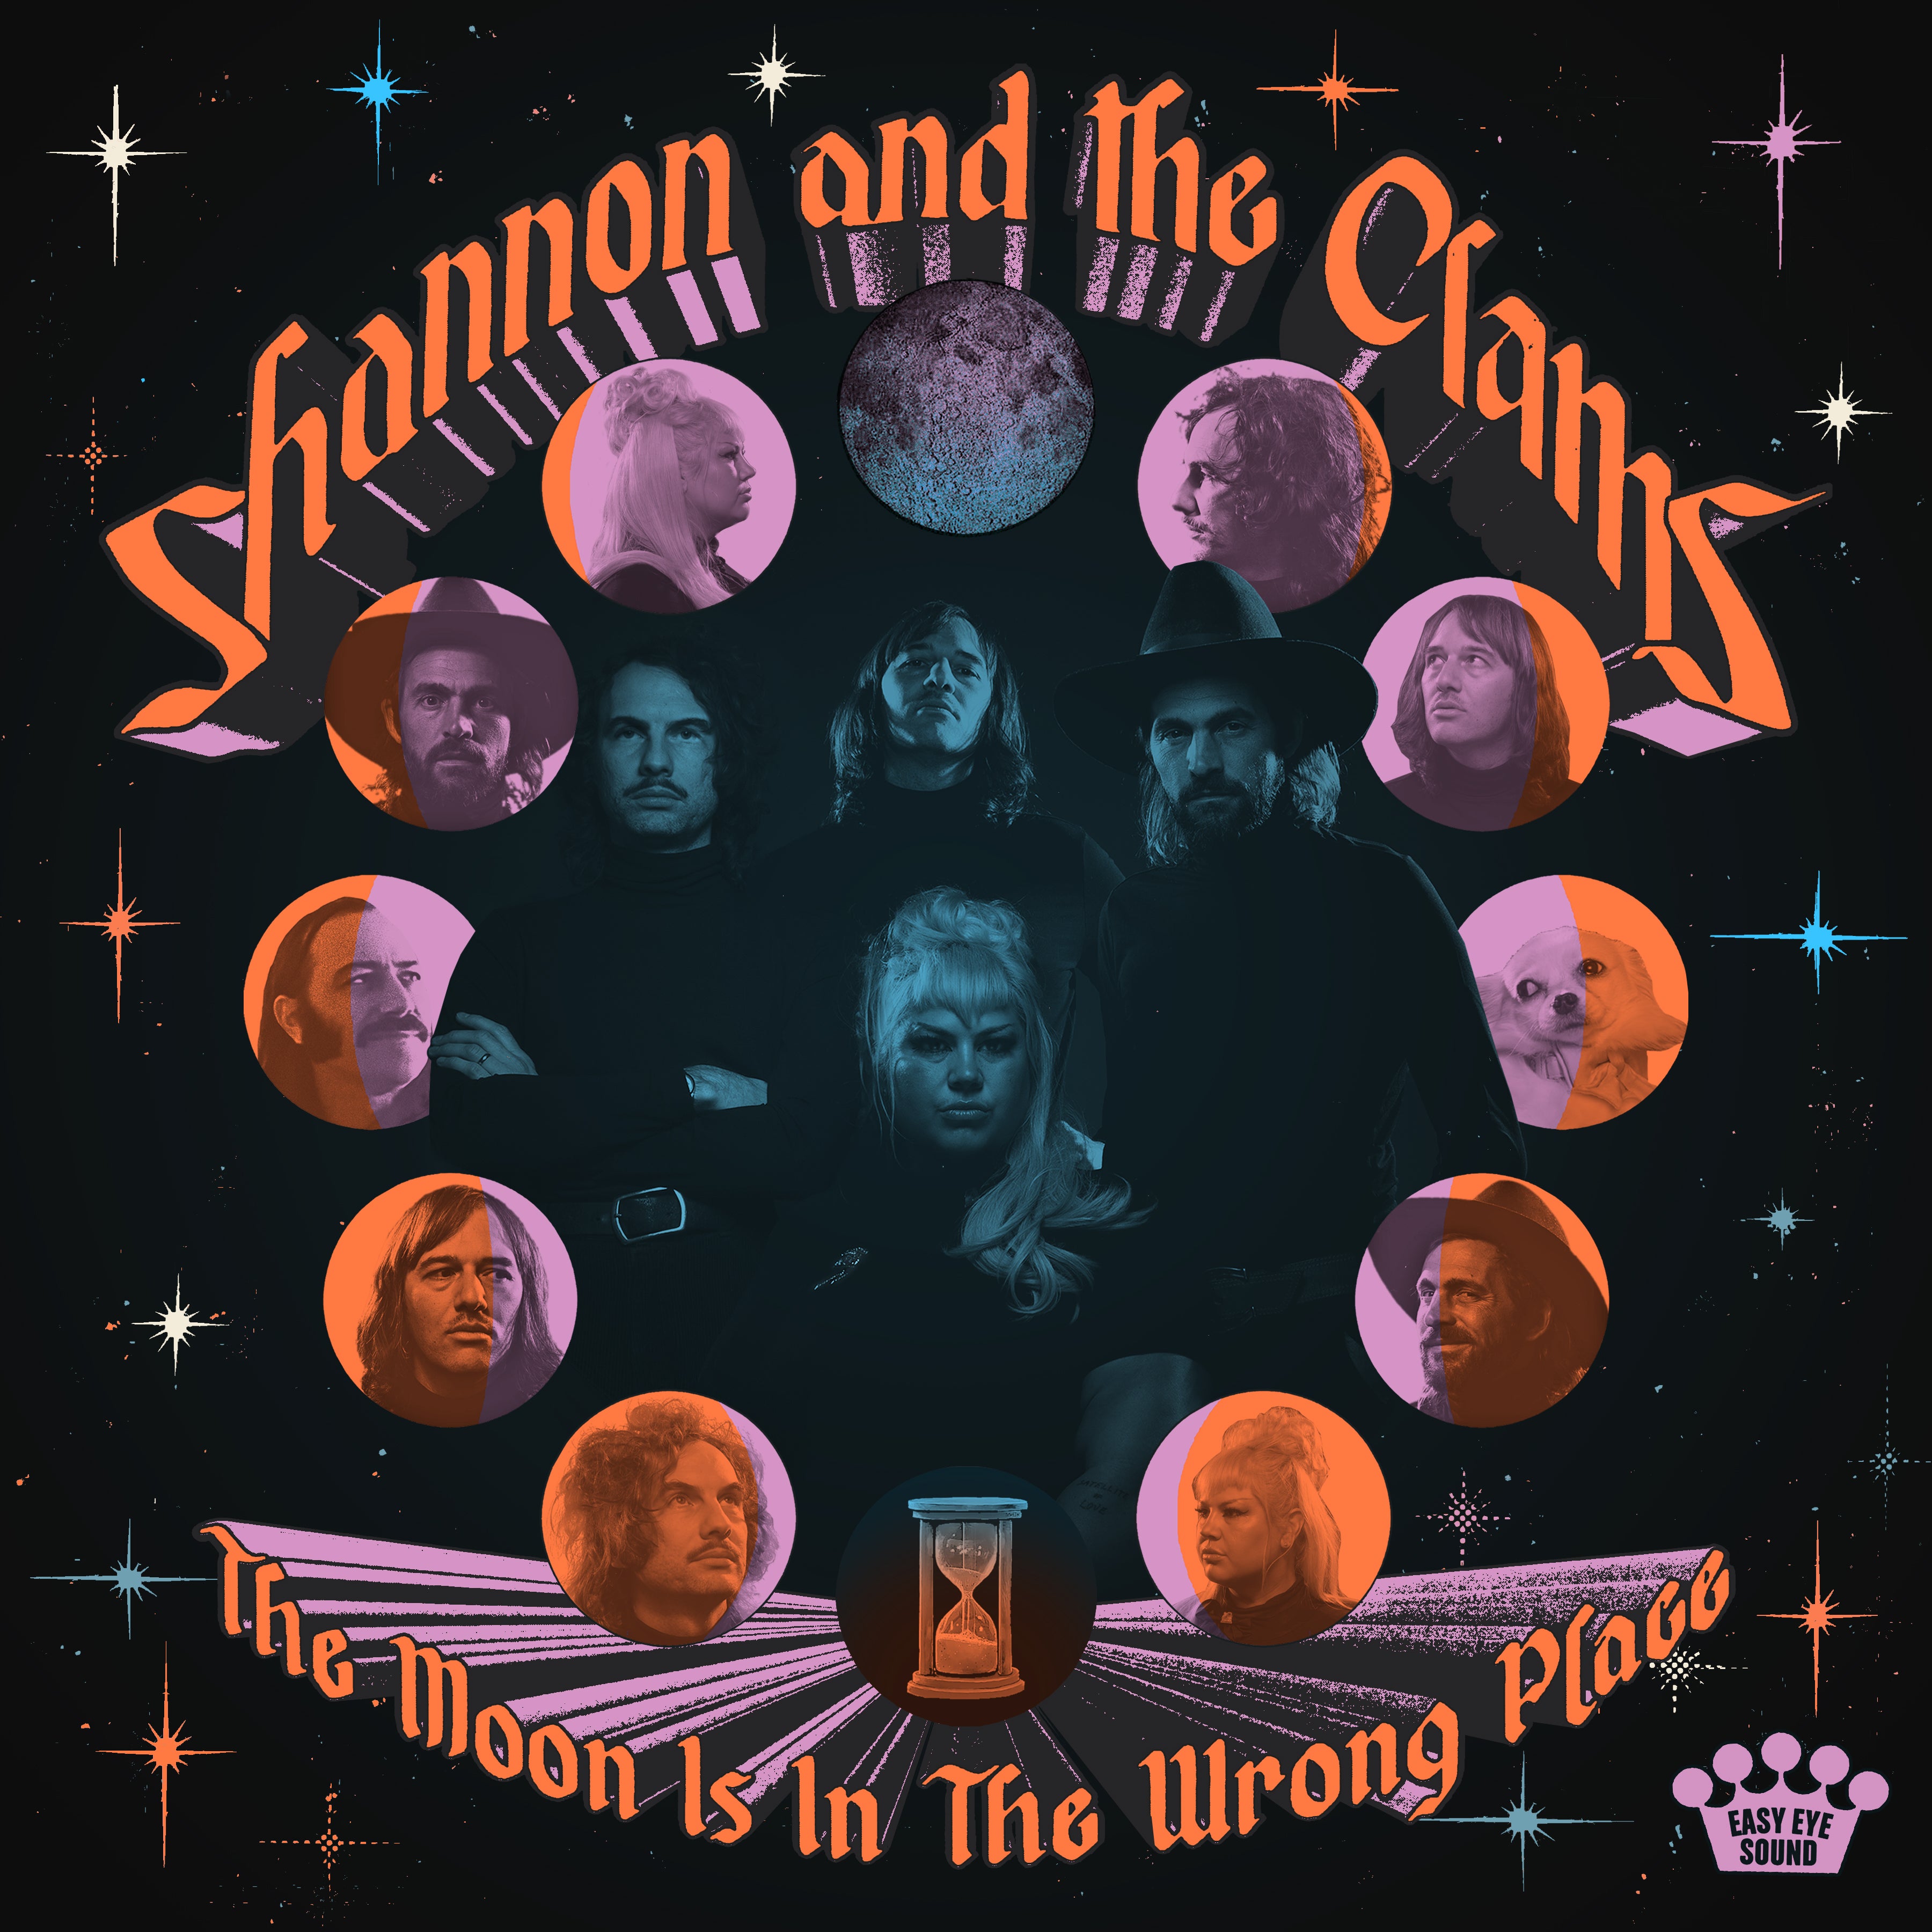 The new album 'The Moon Is In The Wrong Place' by Shannon & The Clams is out now!